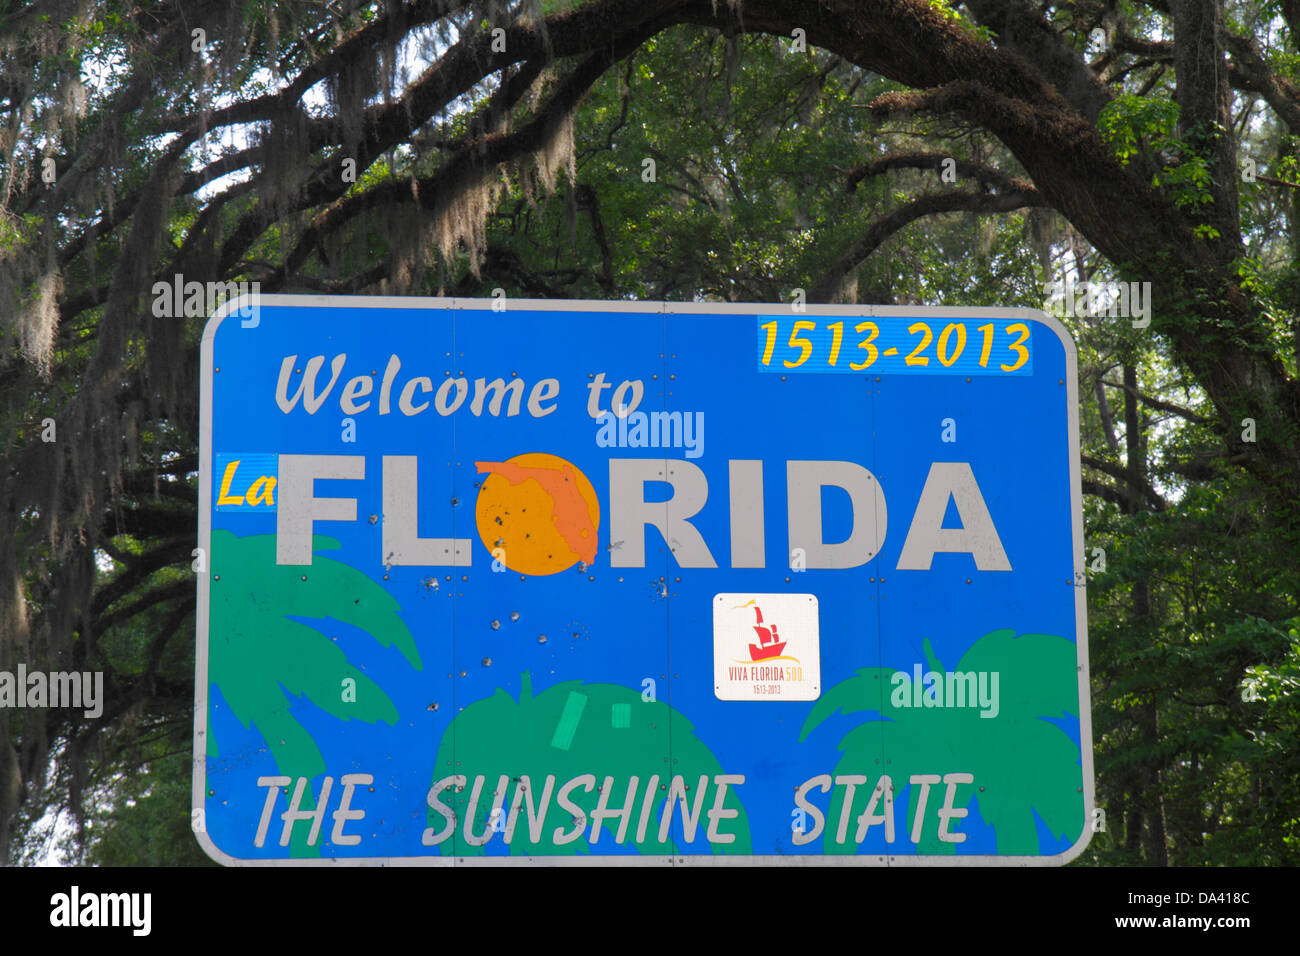 Tallahassee Florida,sign,logo,Welcome to LaFlorida The Sunshine State,trees,canopy,Spanish moss,visitors travel traveling tour tourist tourism landmar Stock Photo